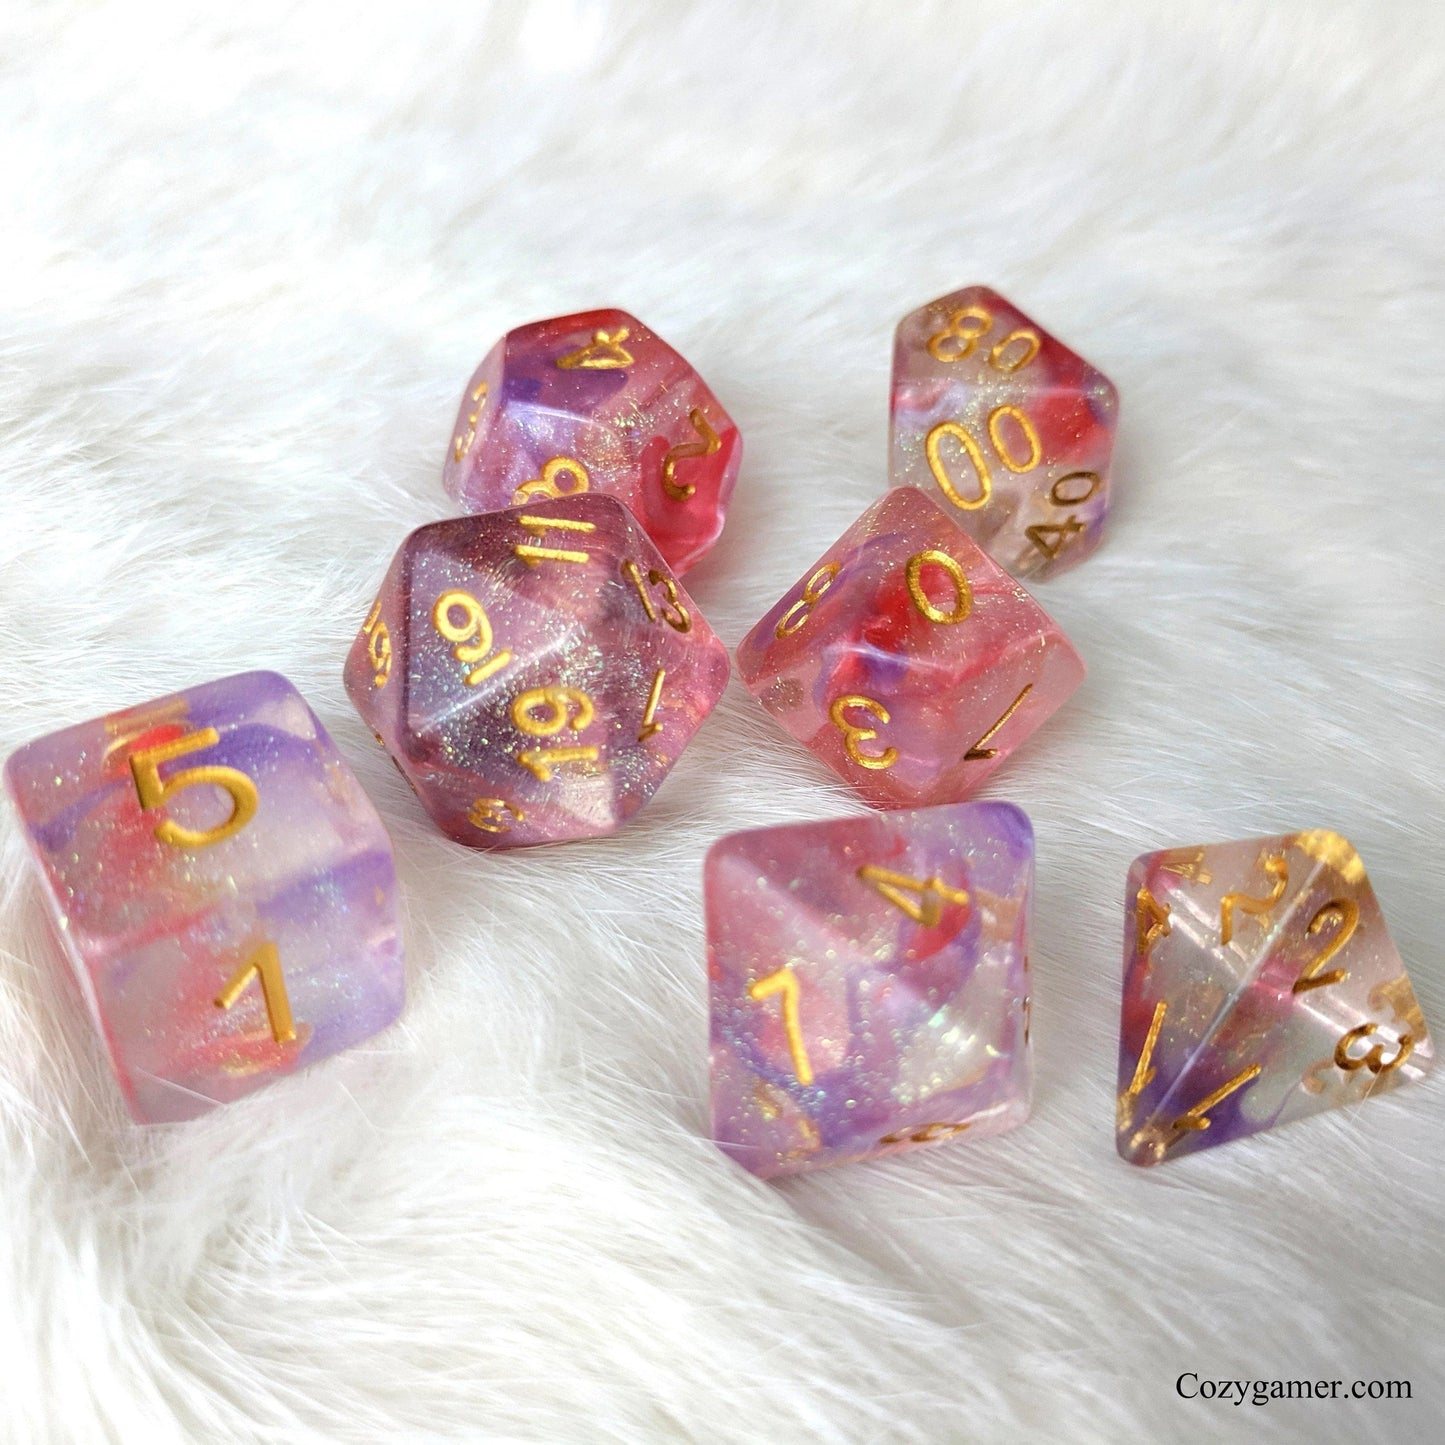 Fuchsia - 7 Dice Set (Purple and Red Translucent Glitter) - The Fourth Place